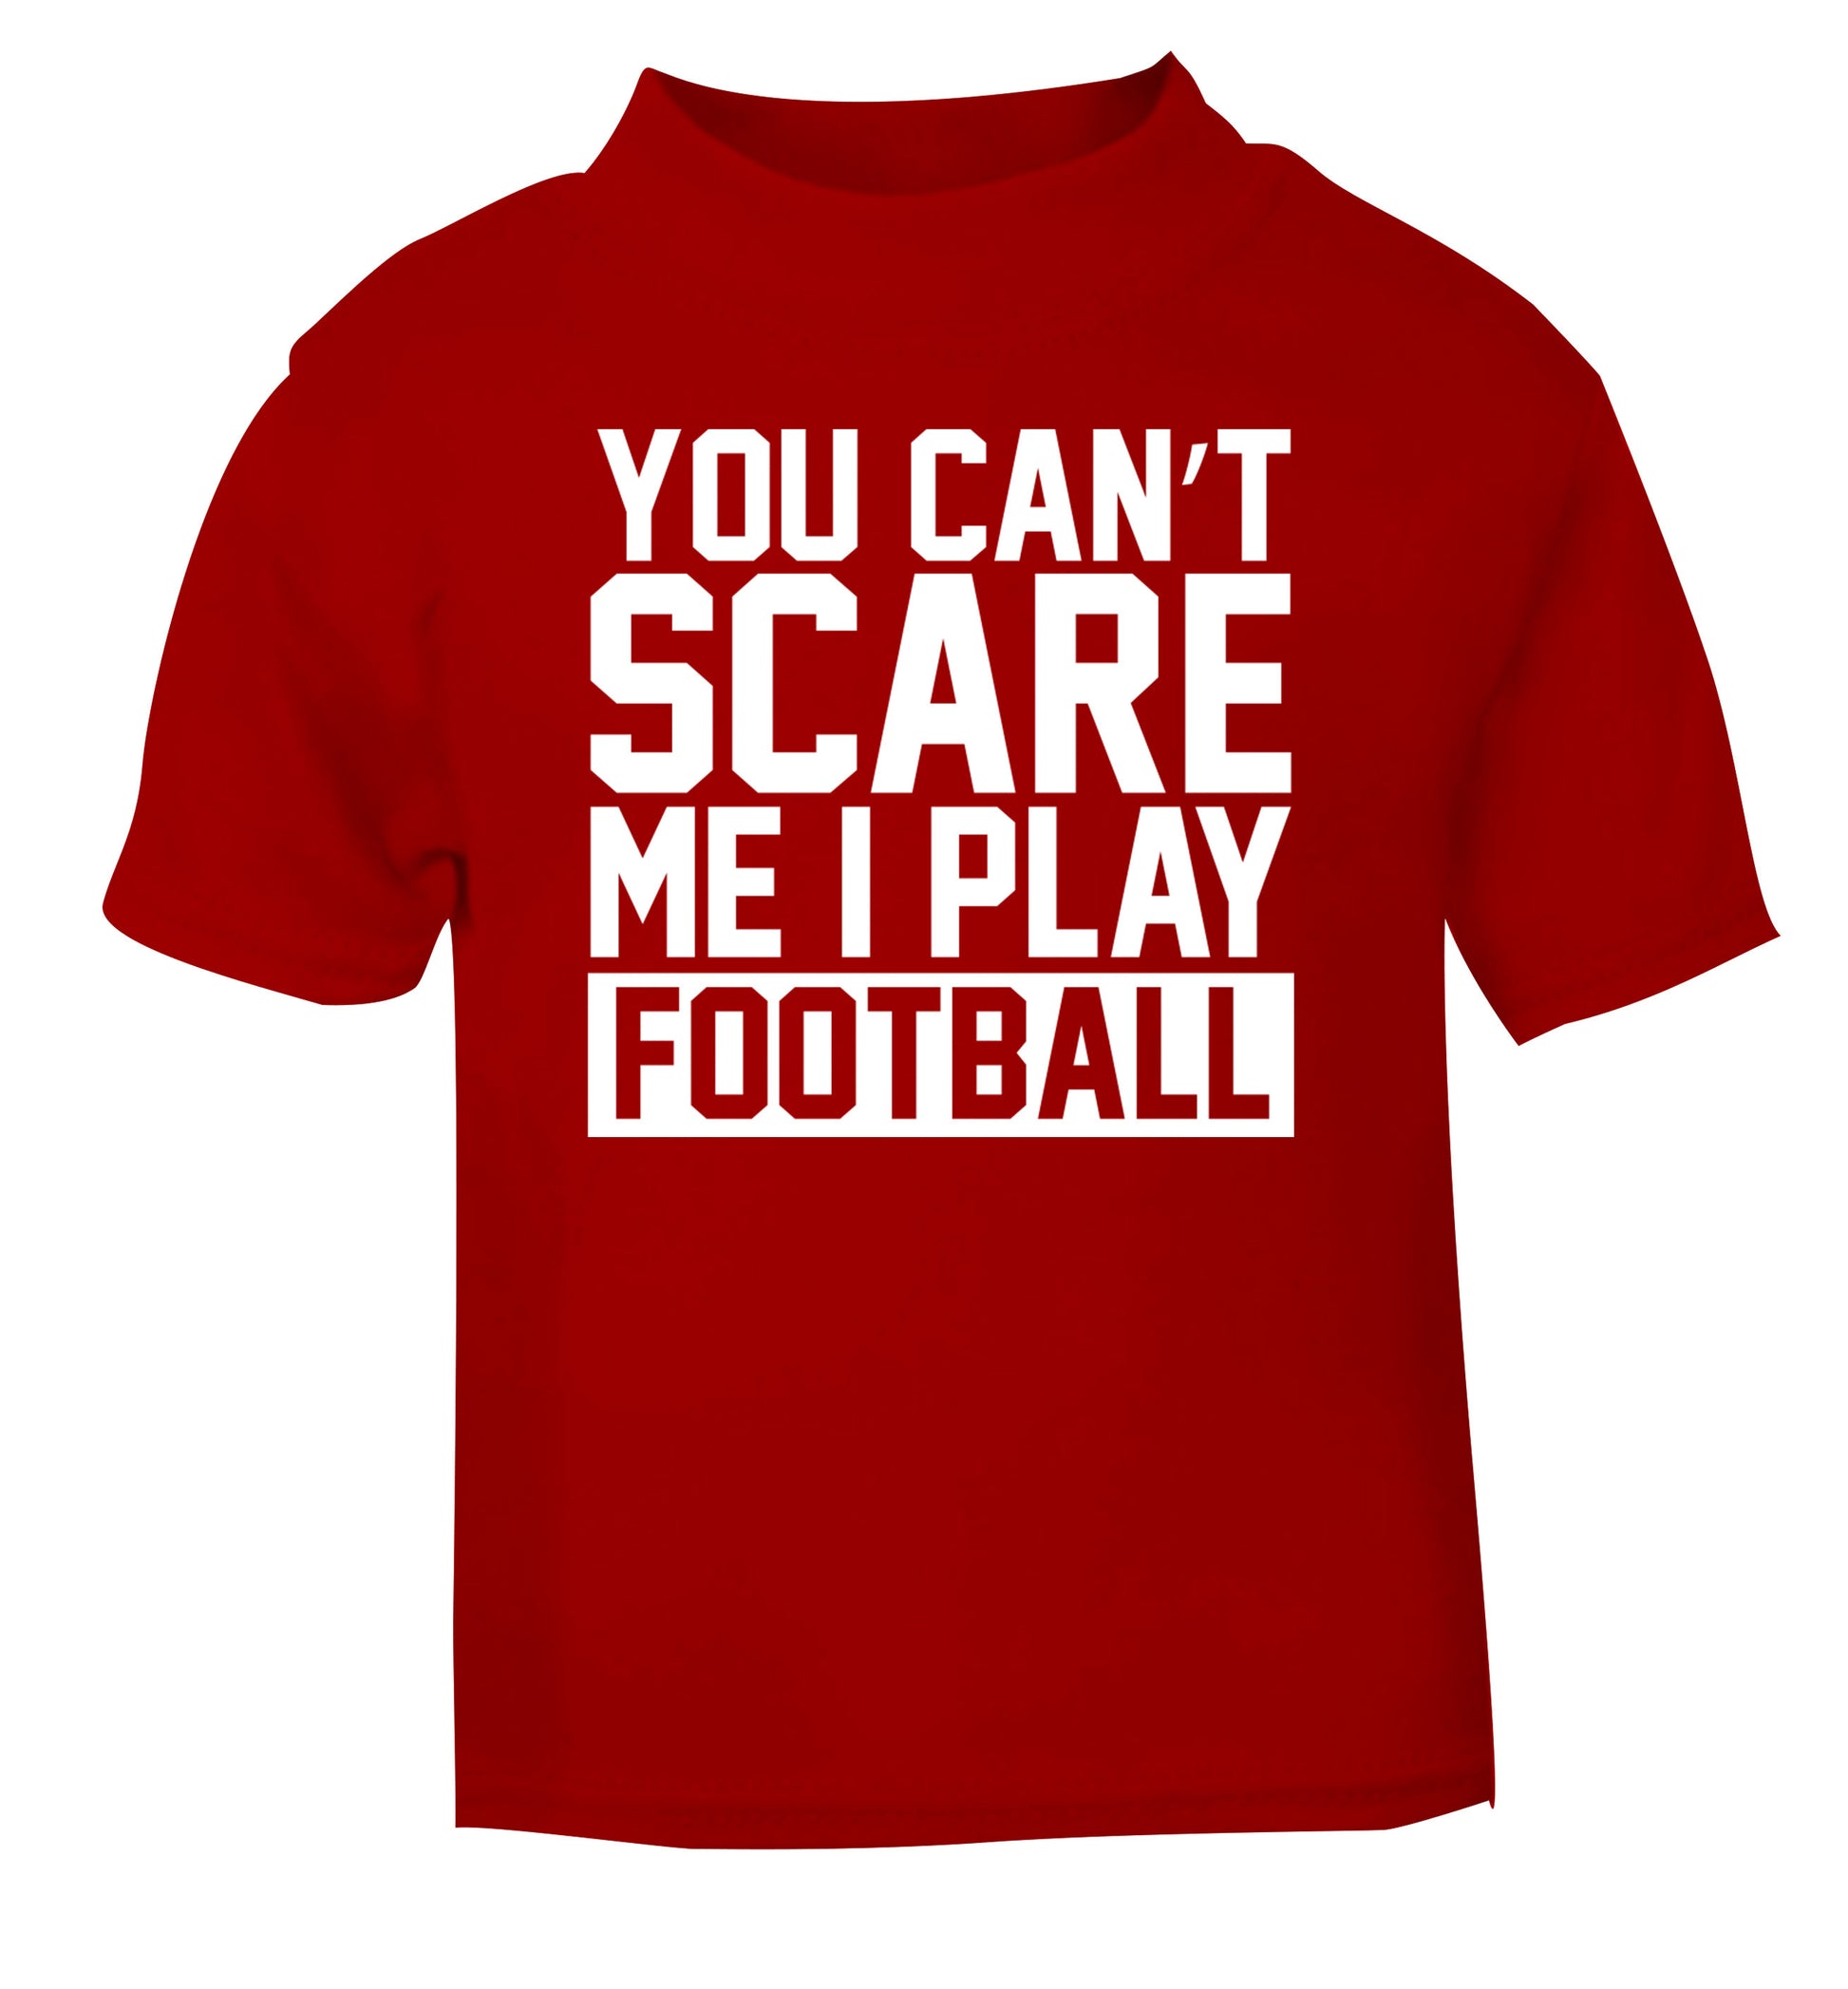 You can't scare me I play football red Baby Toddler Tshirt 2 Years